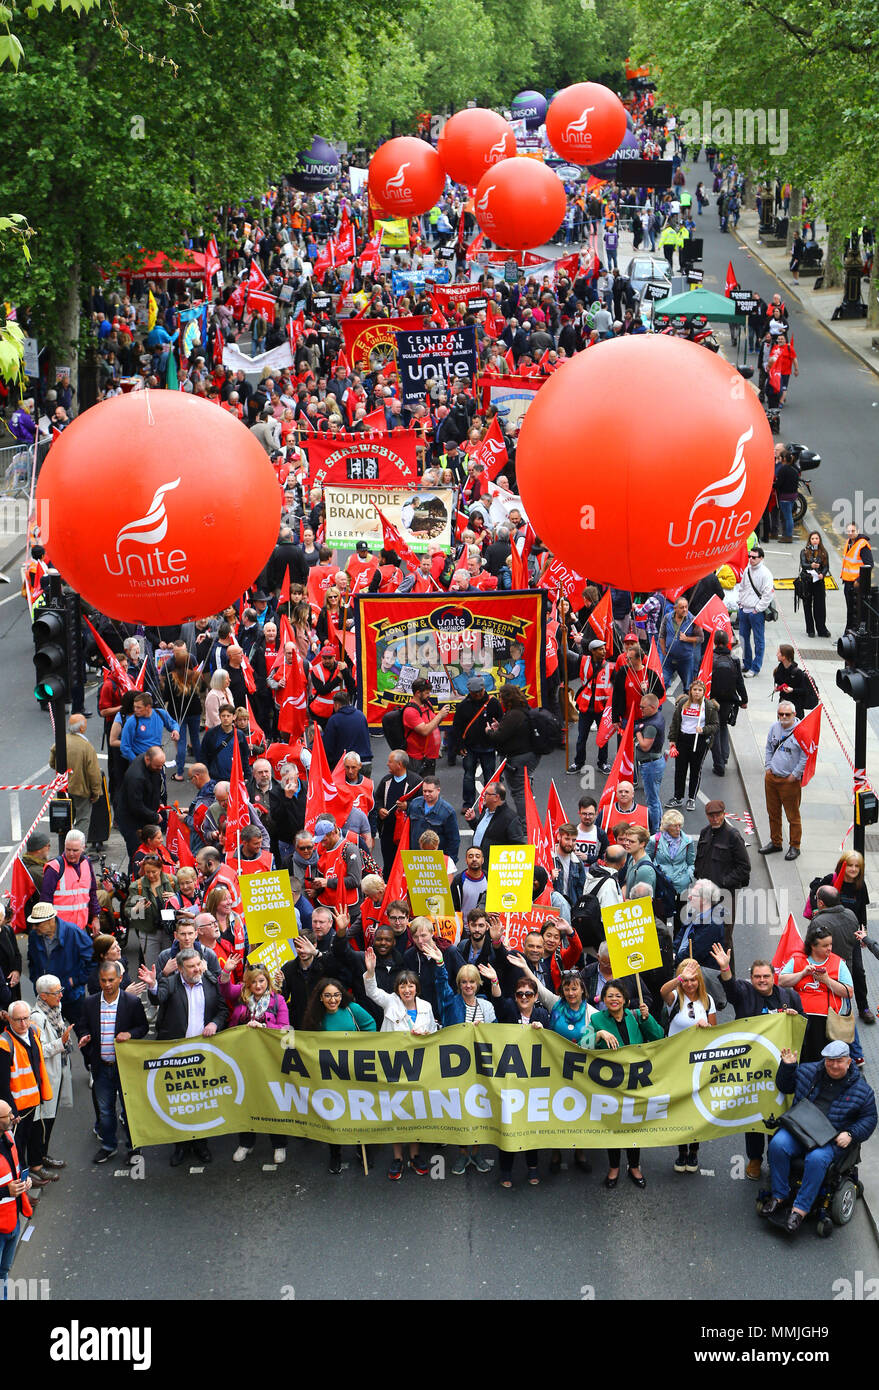 Demonstrators during a TUC rally in central London, as part of its 'great jobs' campaign. Stock Photo